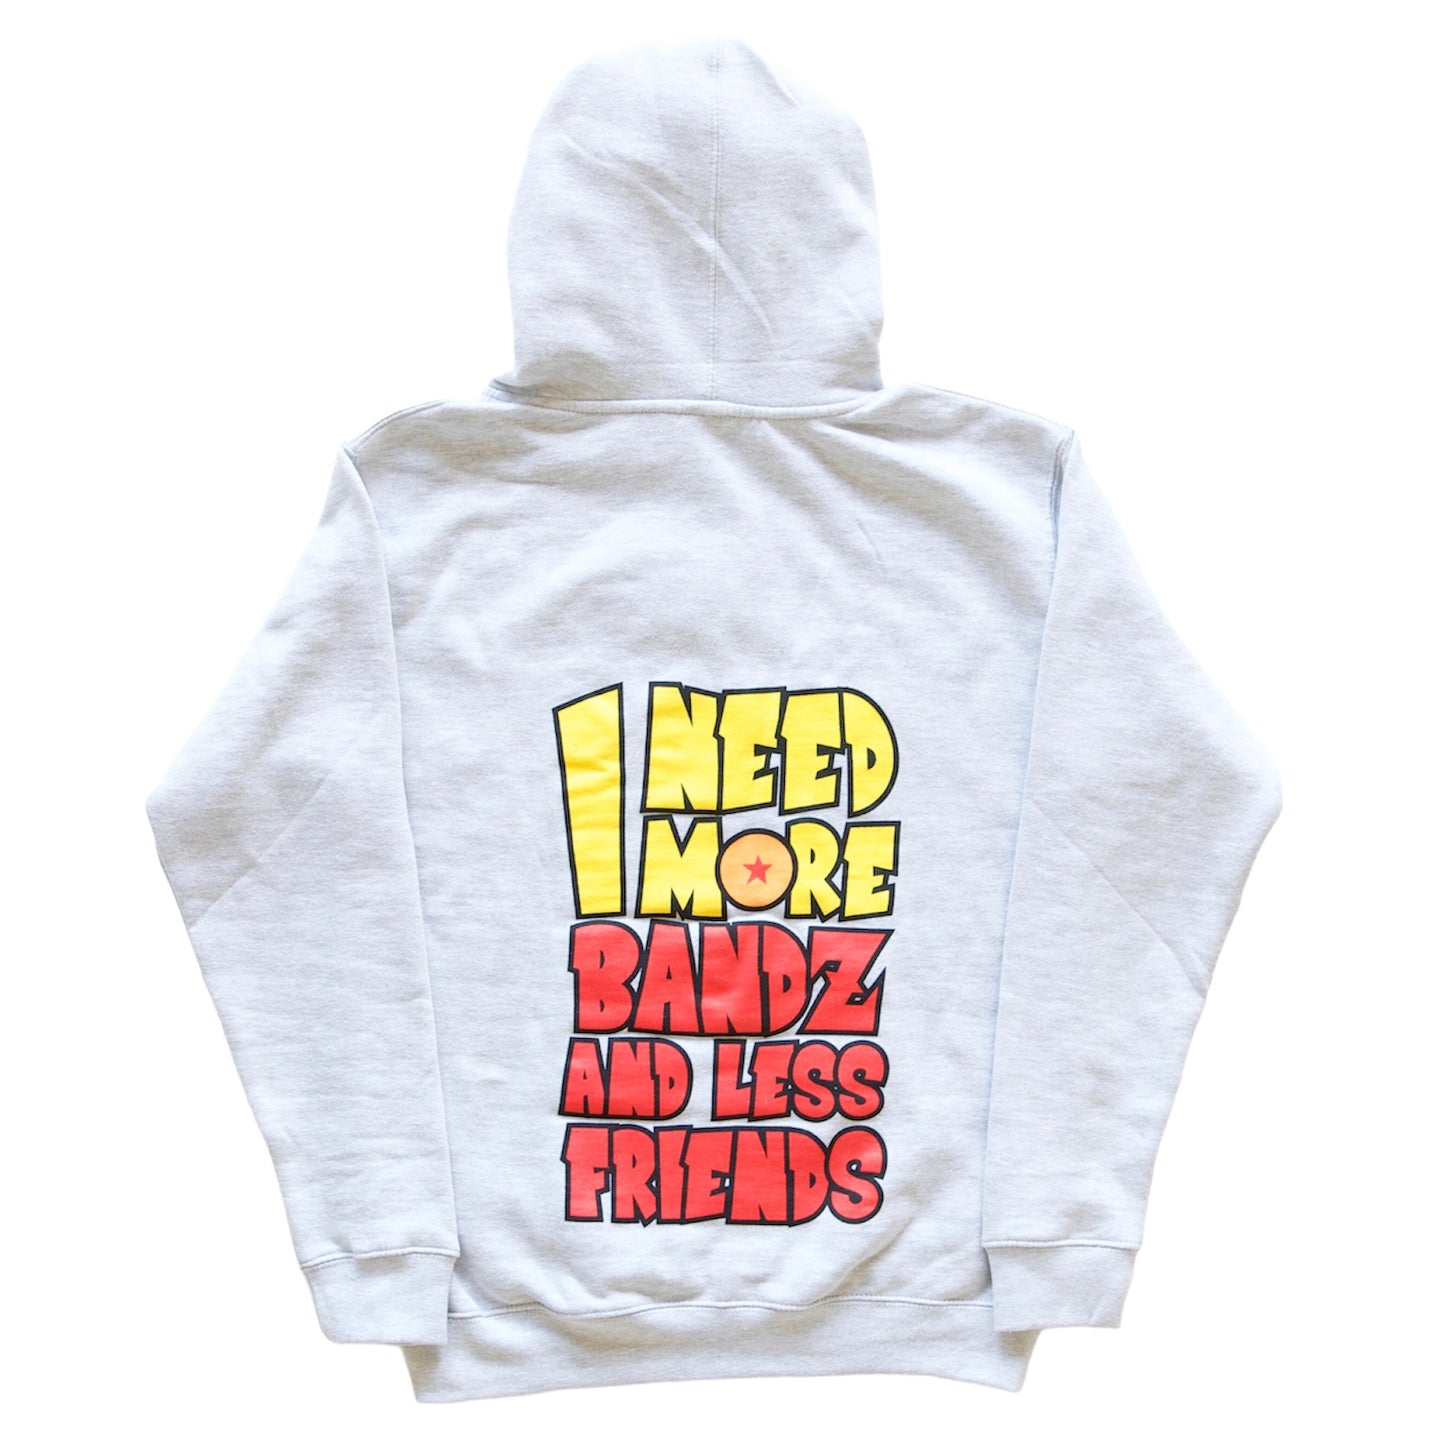 Heather Gray “I Need More Bandz And Less Friends” Hoodie